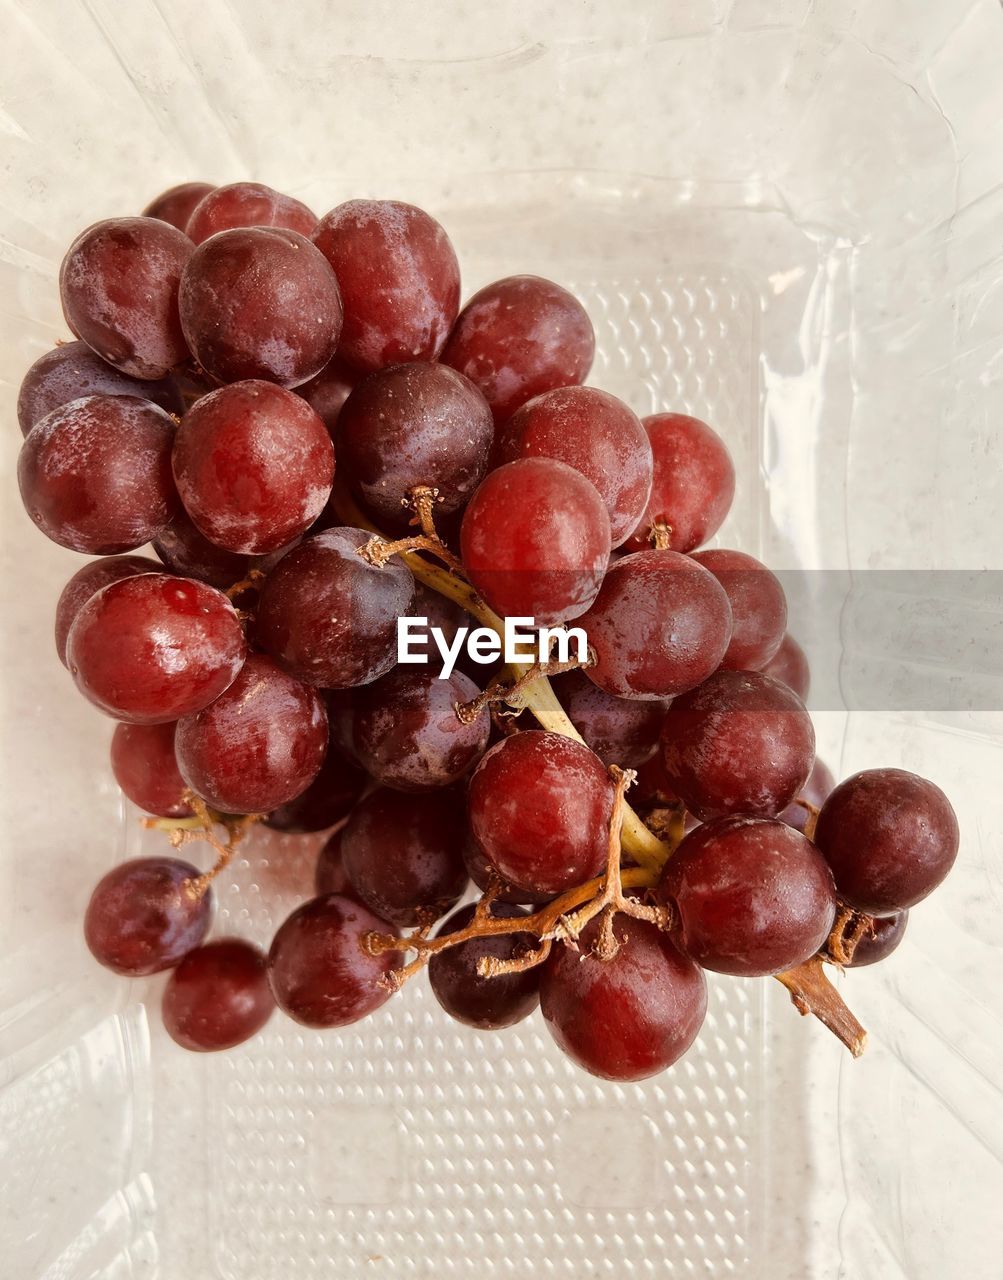 Grapes in a translucent plastic punnet. one bunch. red grapes, fresh and juicy.